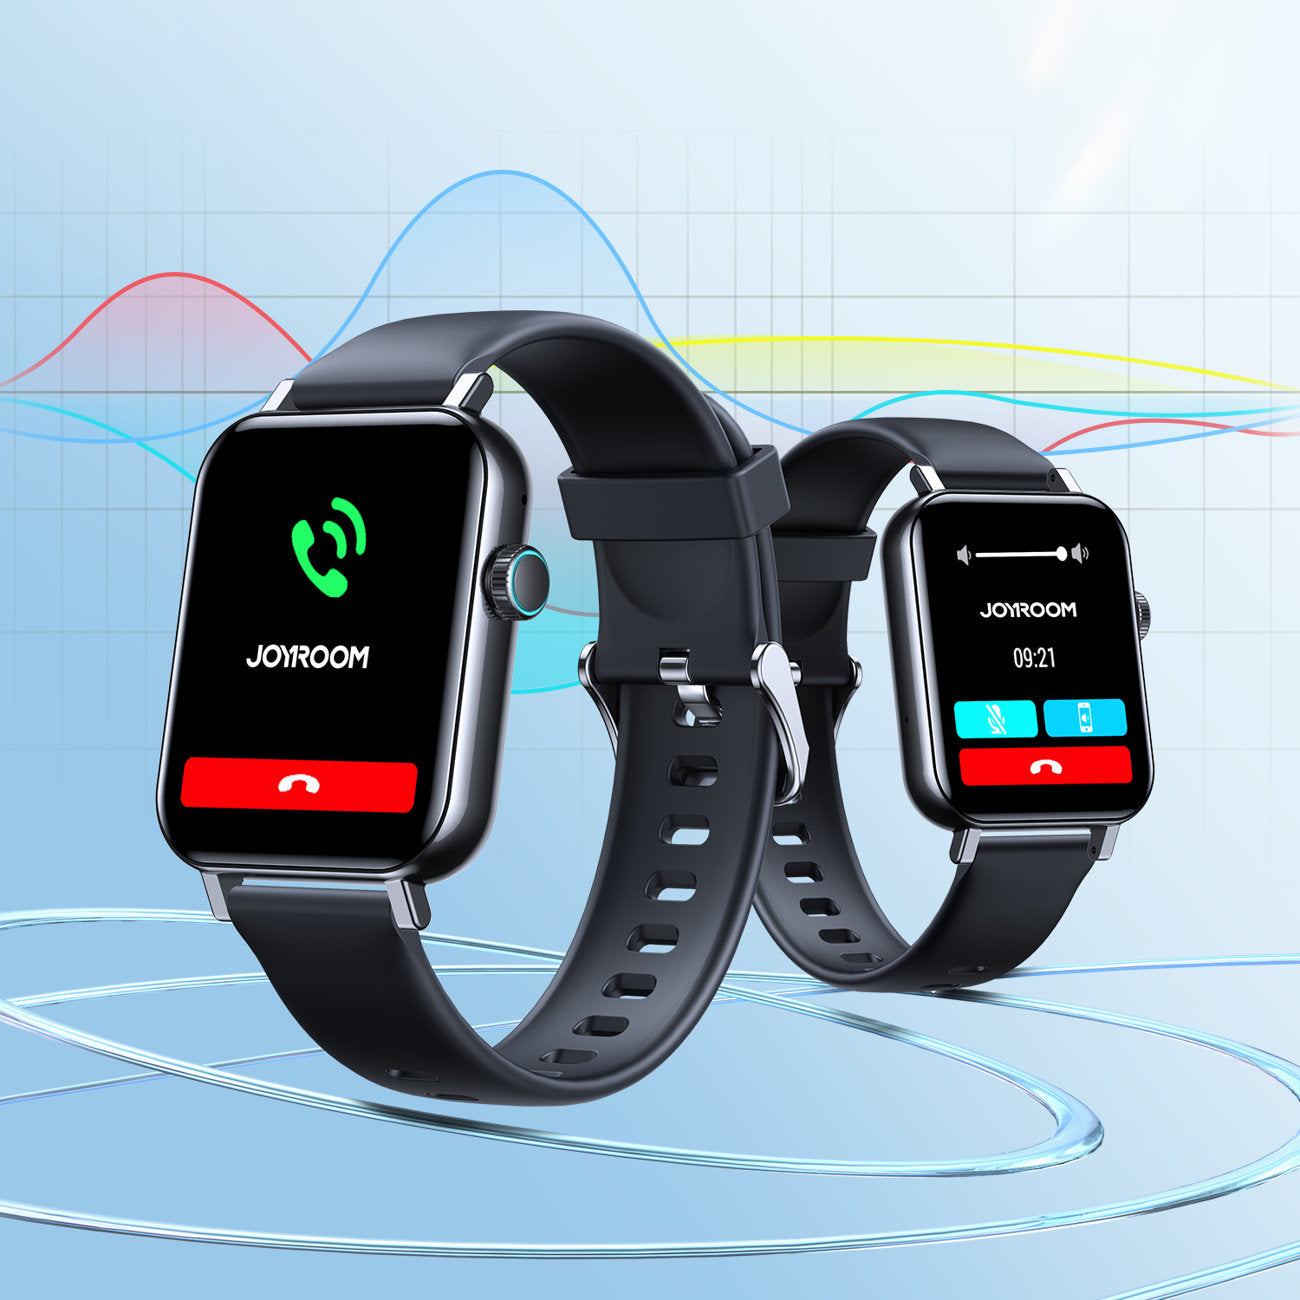 Joyroom Fit-Life Series smartwatch with call answering function IP68 black (JR-FT5)